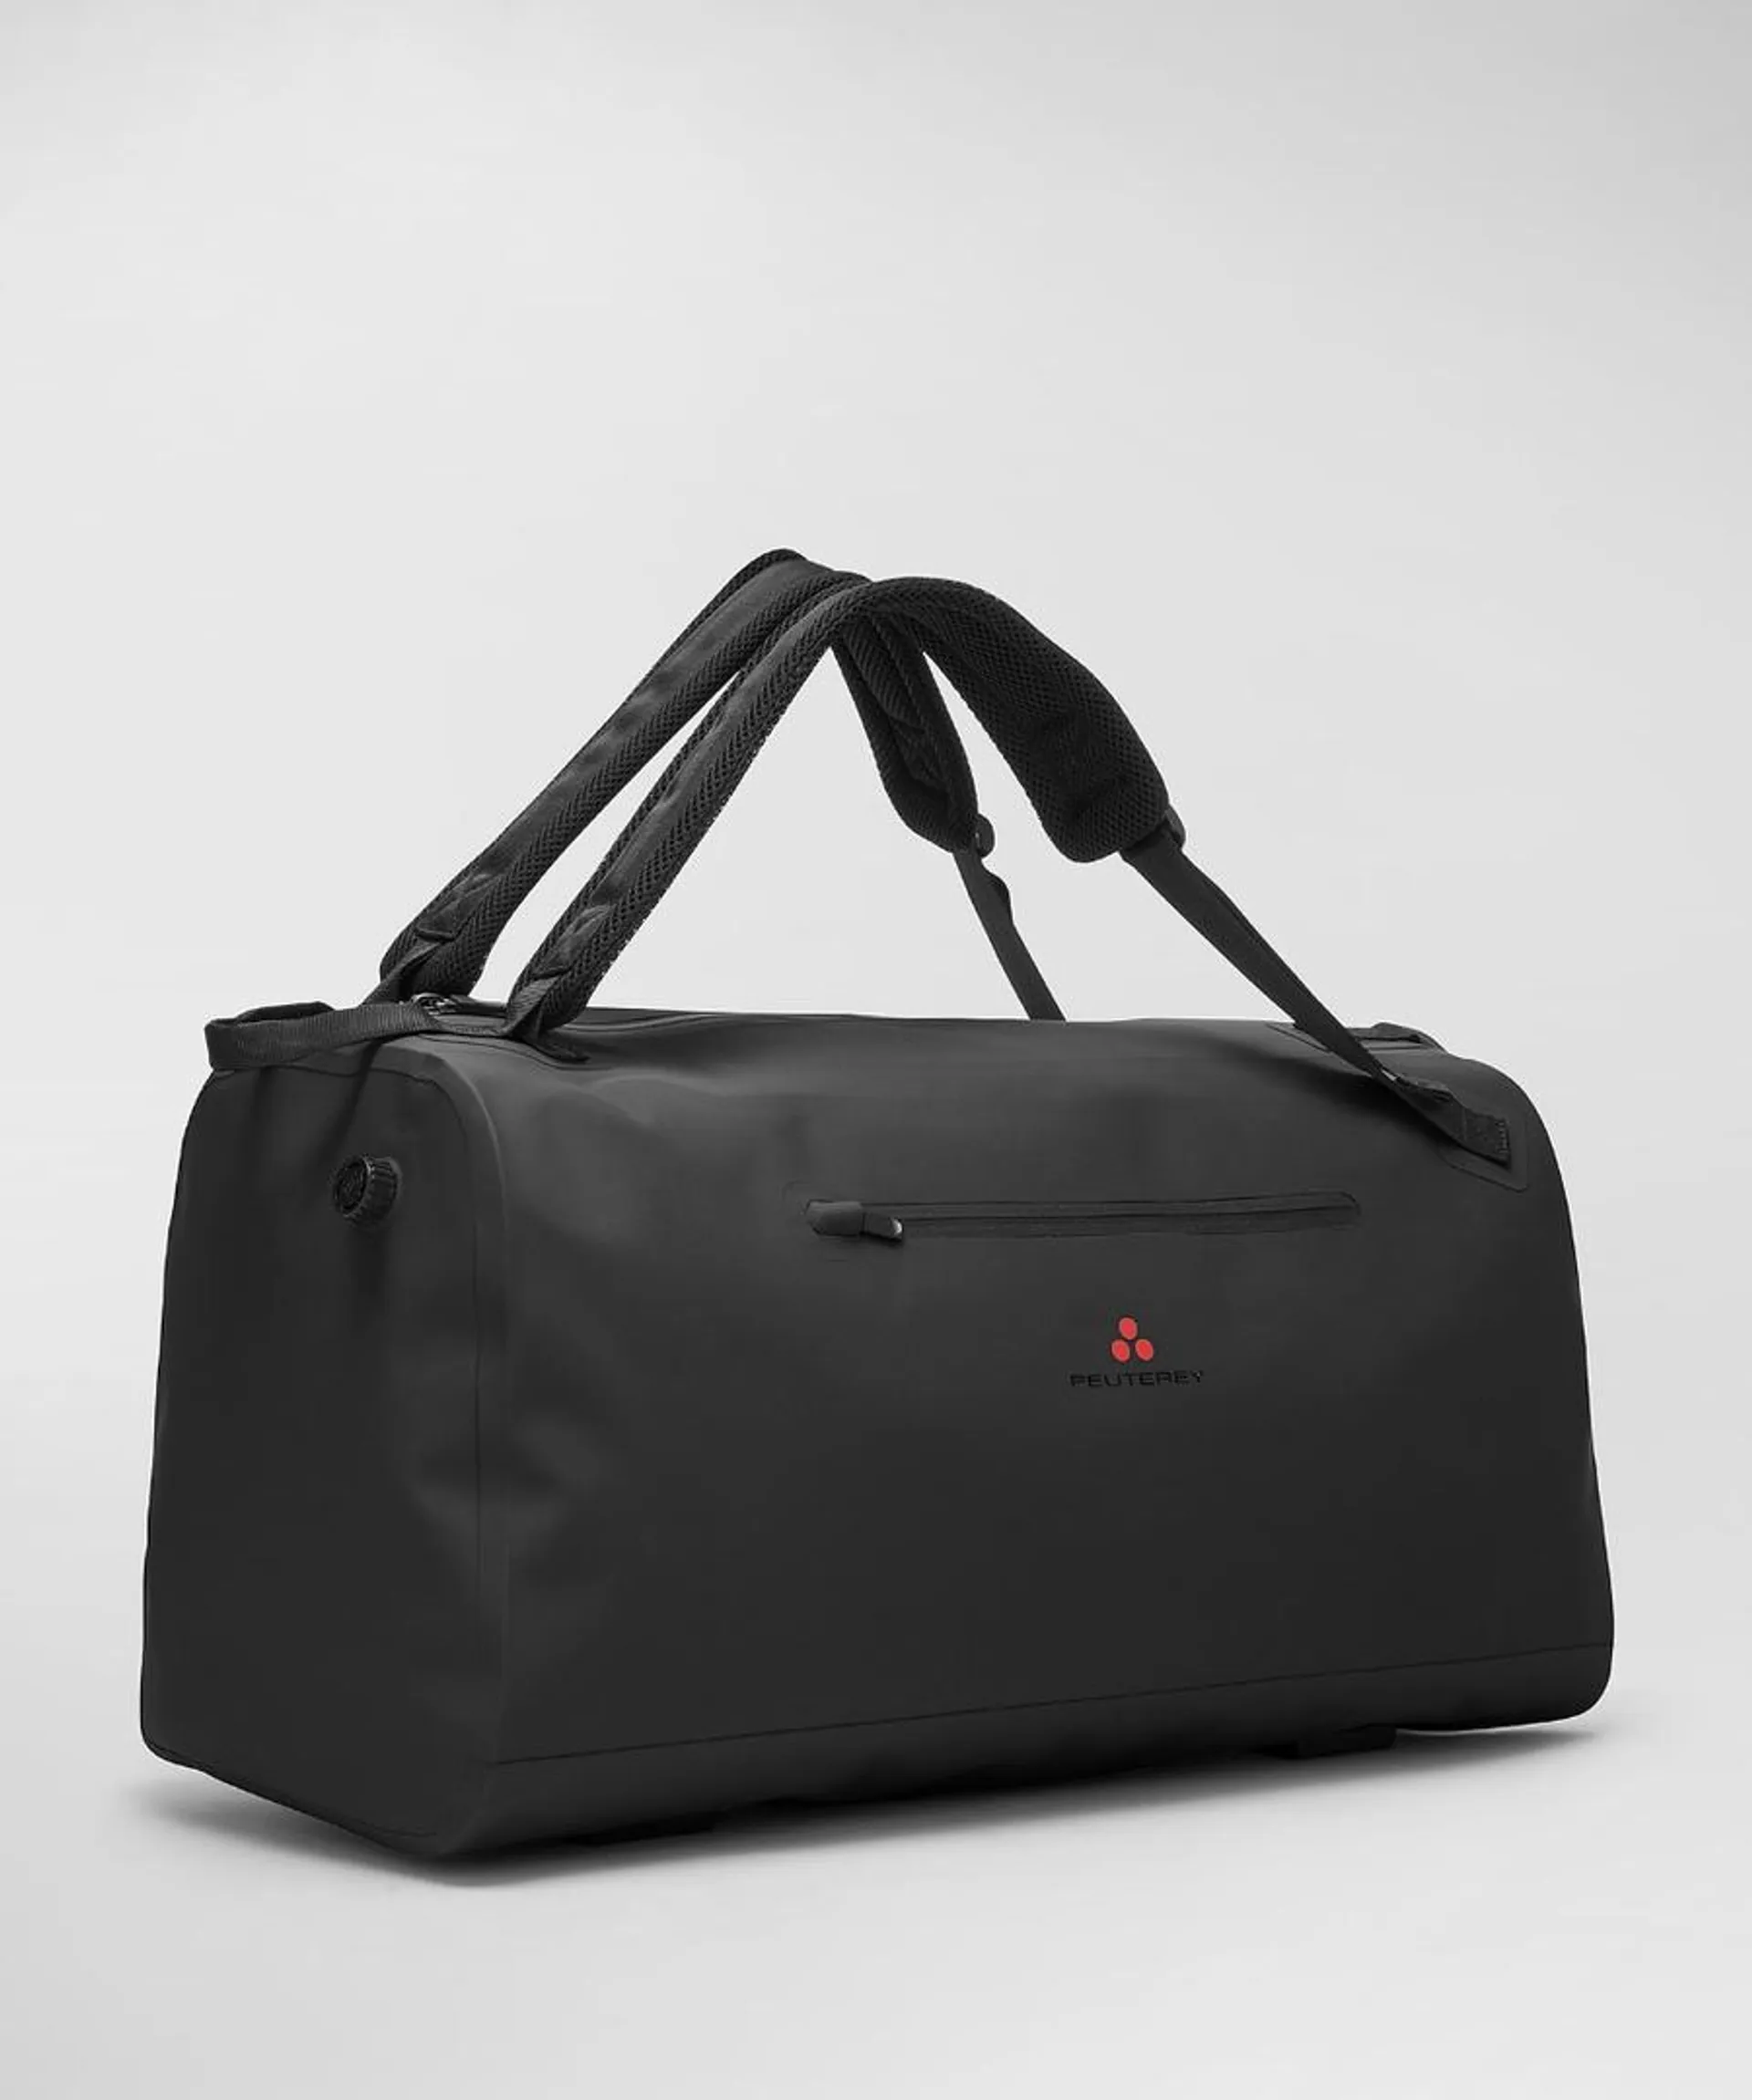 70L travel bag with space-saver valve